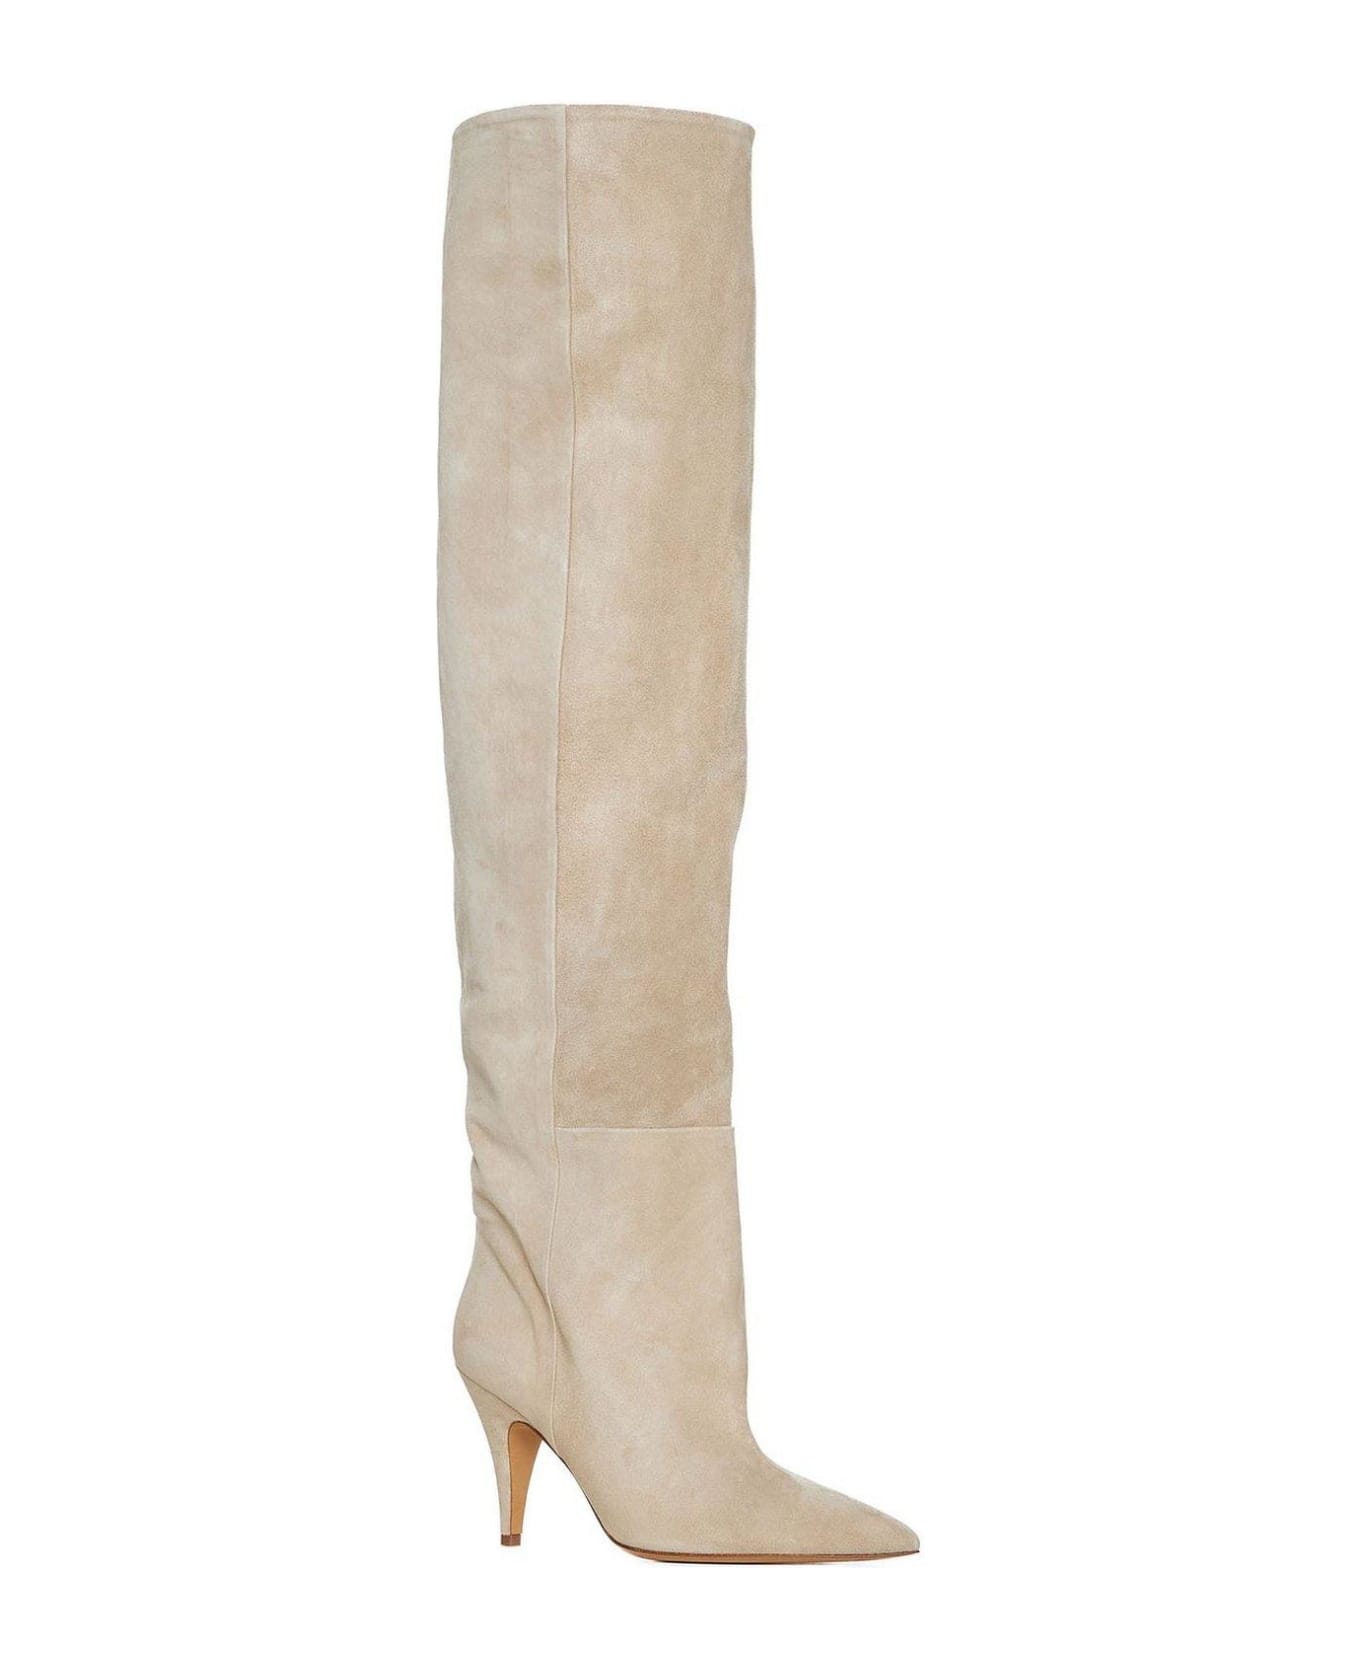 Khaite The River Pointed-toe Knee-high Boots - Beige suede ブーツ